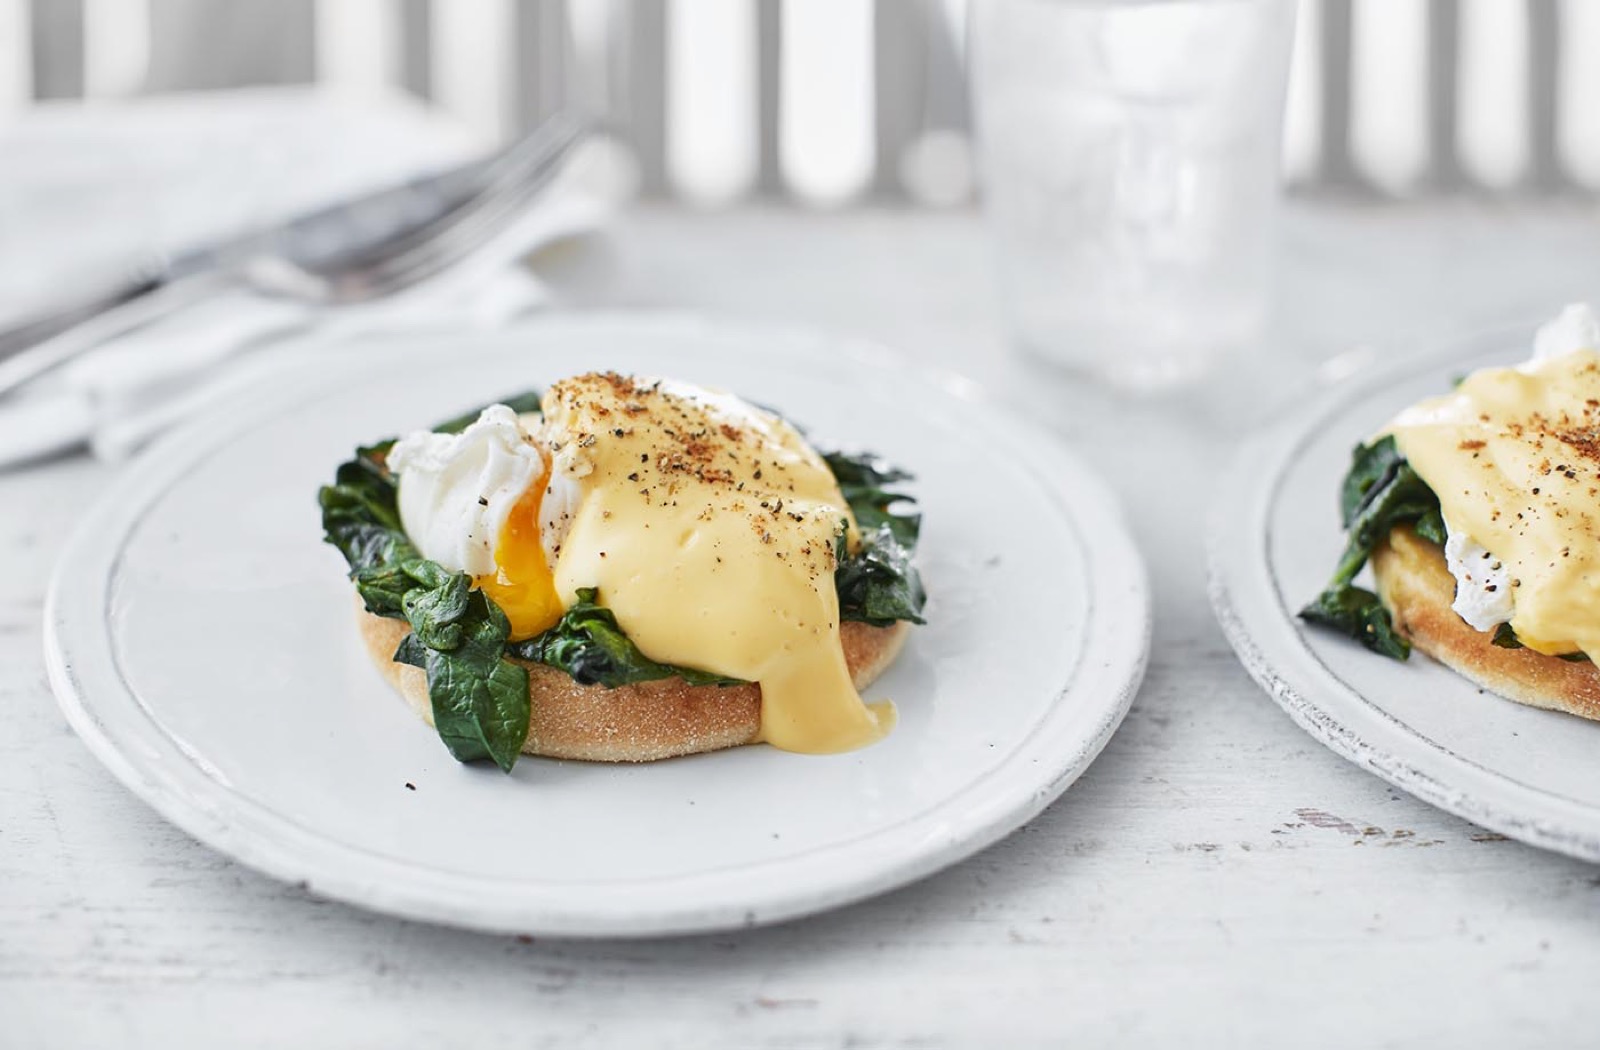 Take a Trip Around Italy in This Quiz — If You Get 18/25, You Win Eggs Florentine